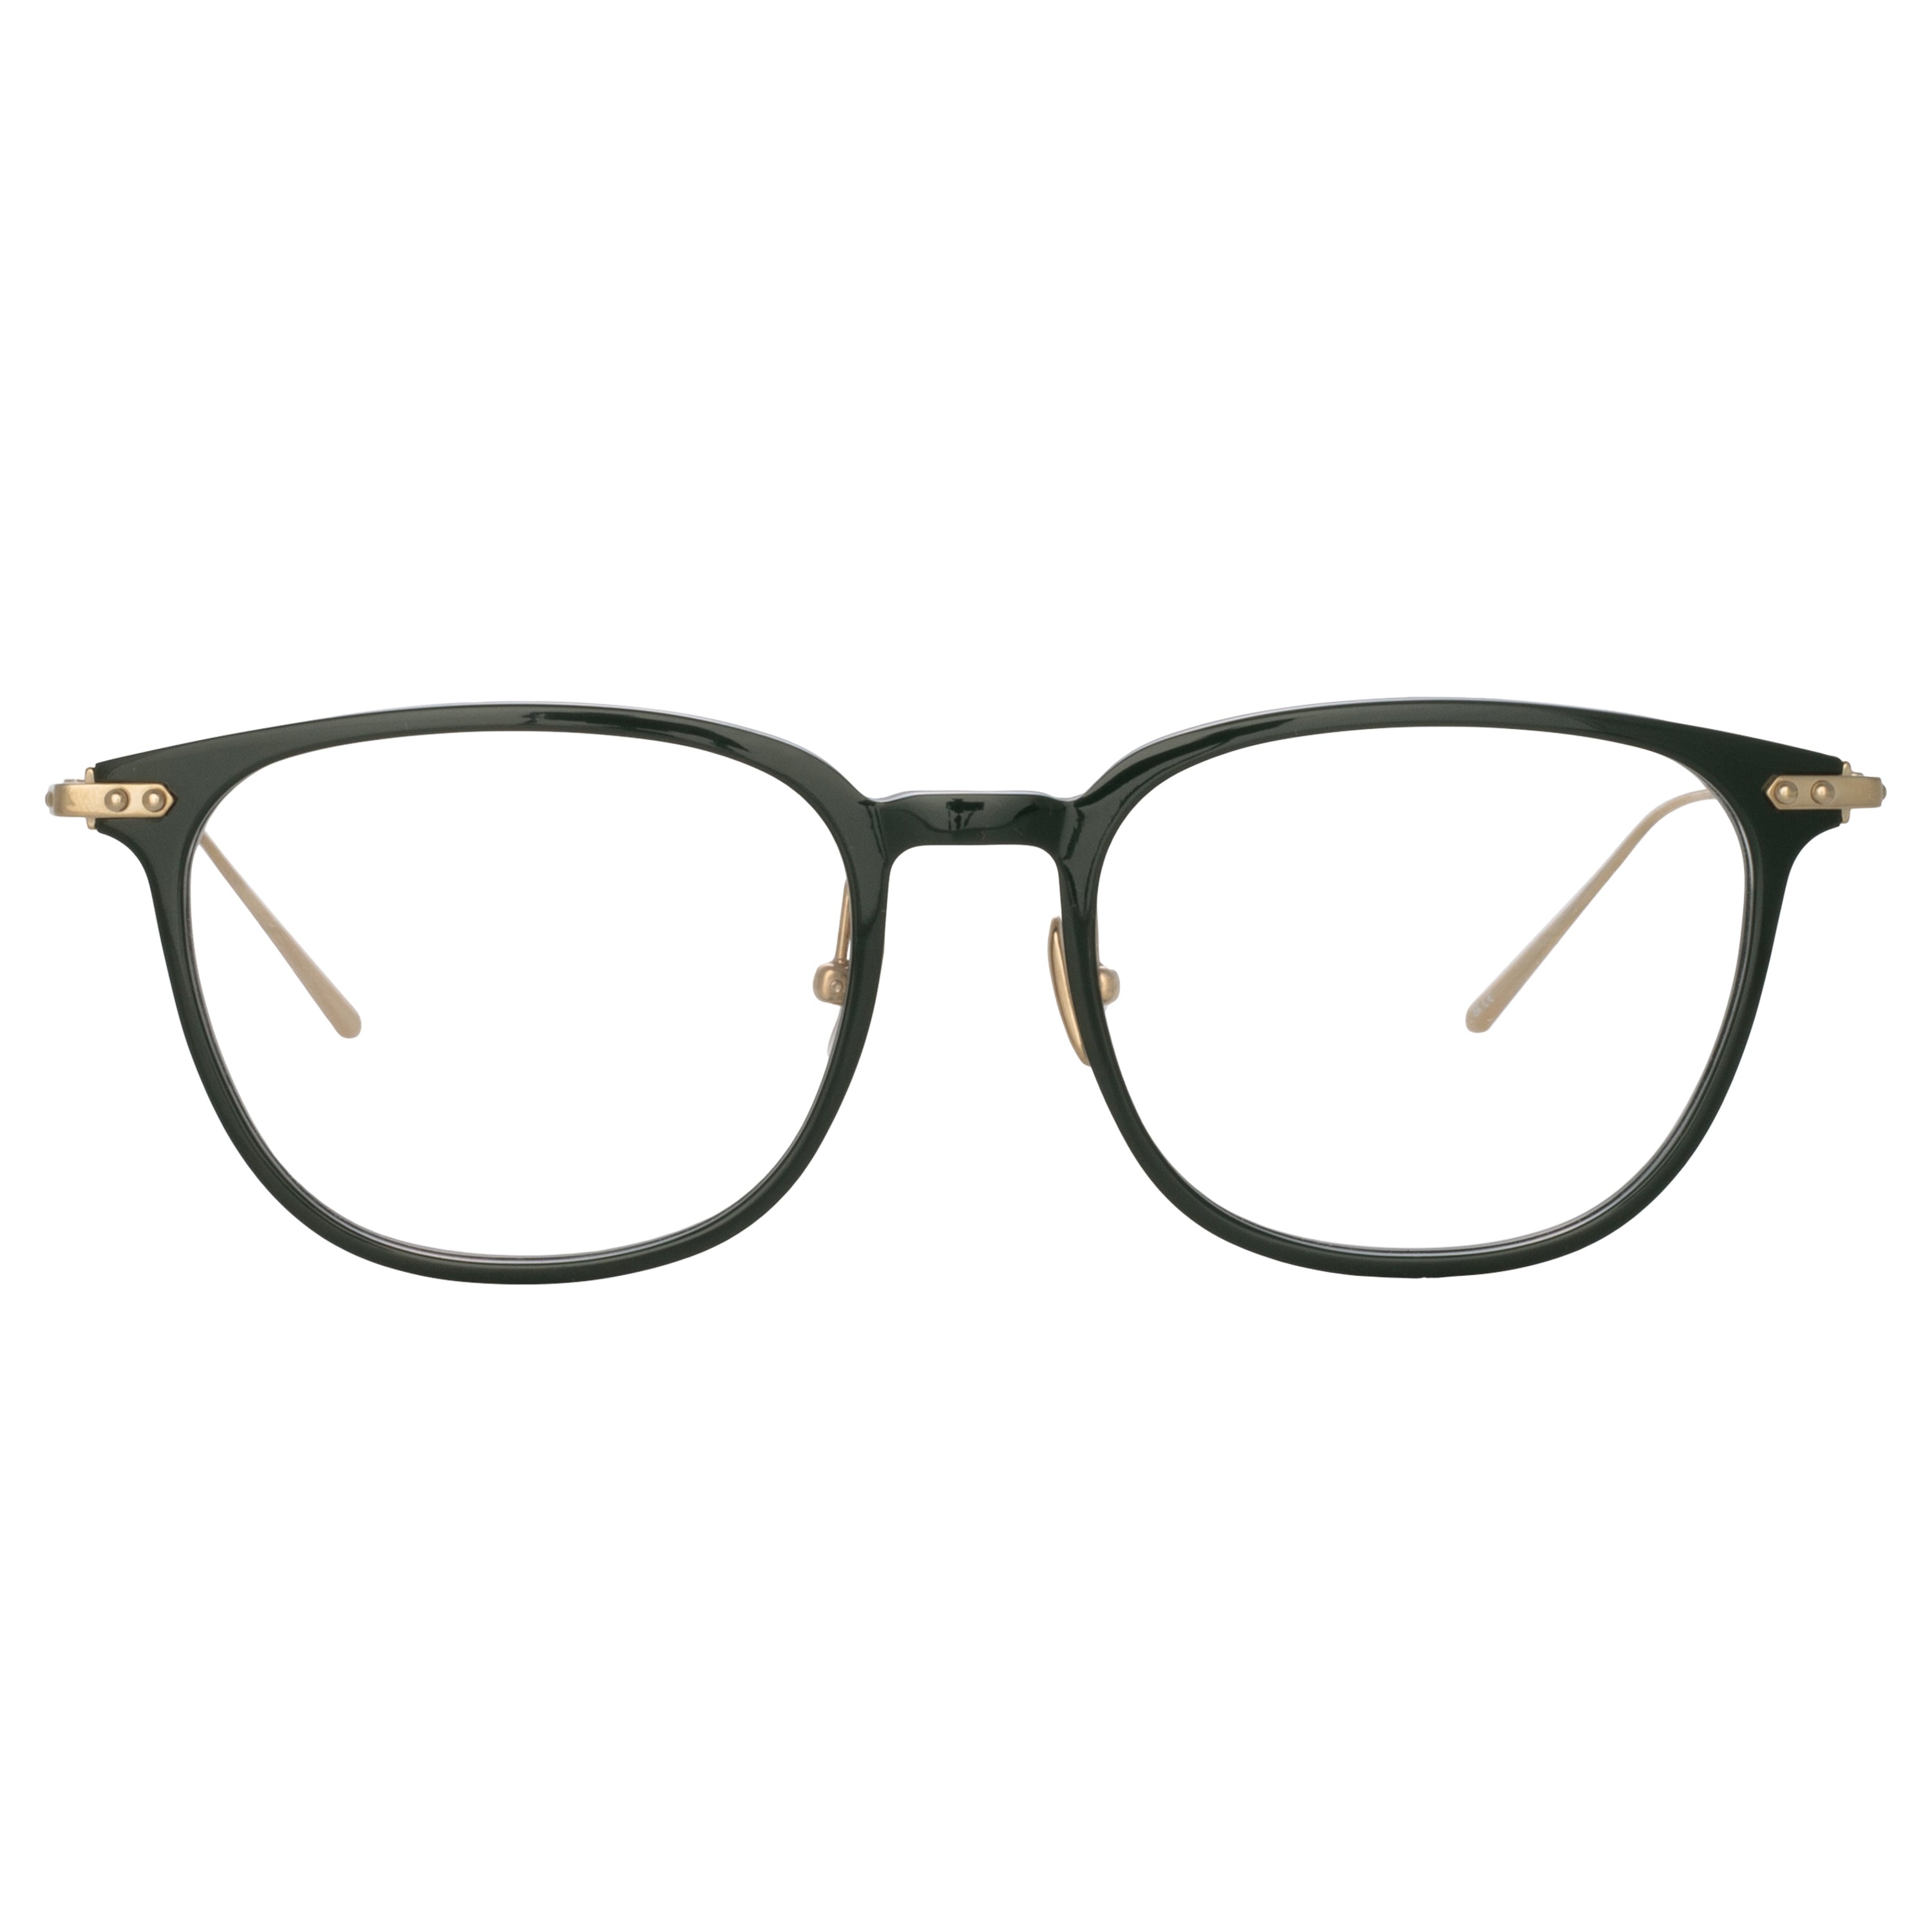 WRIGHT RECTANGULAR OPTICAL FRAME IN FOREST GREEN (ASIAN FIT) - 2